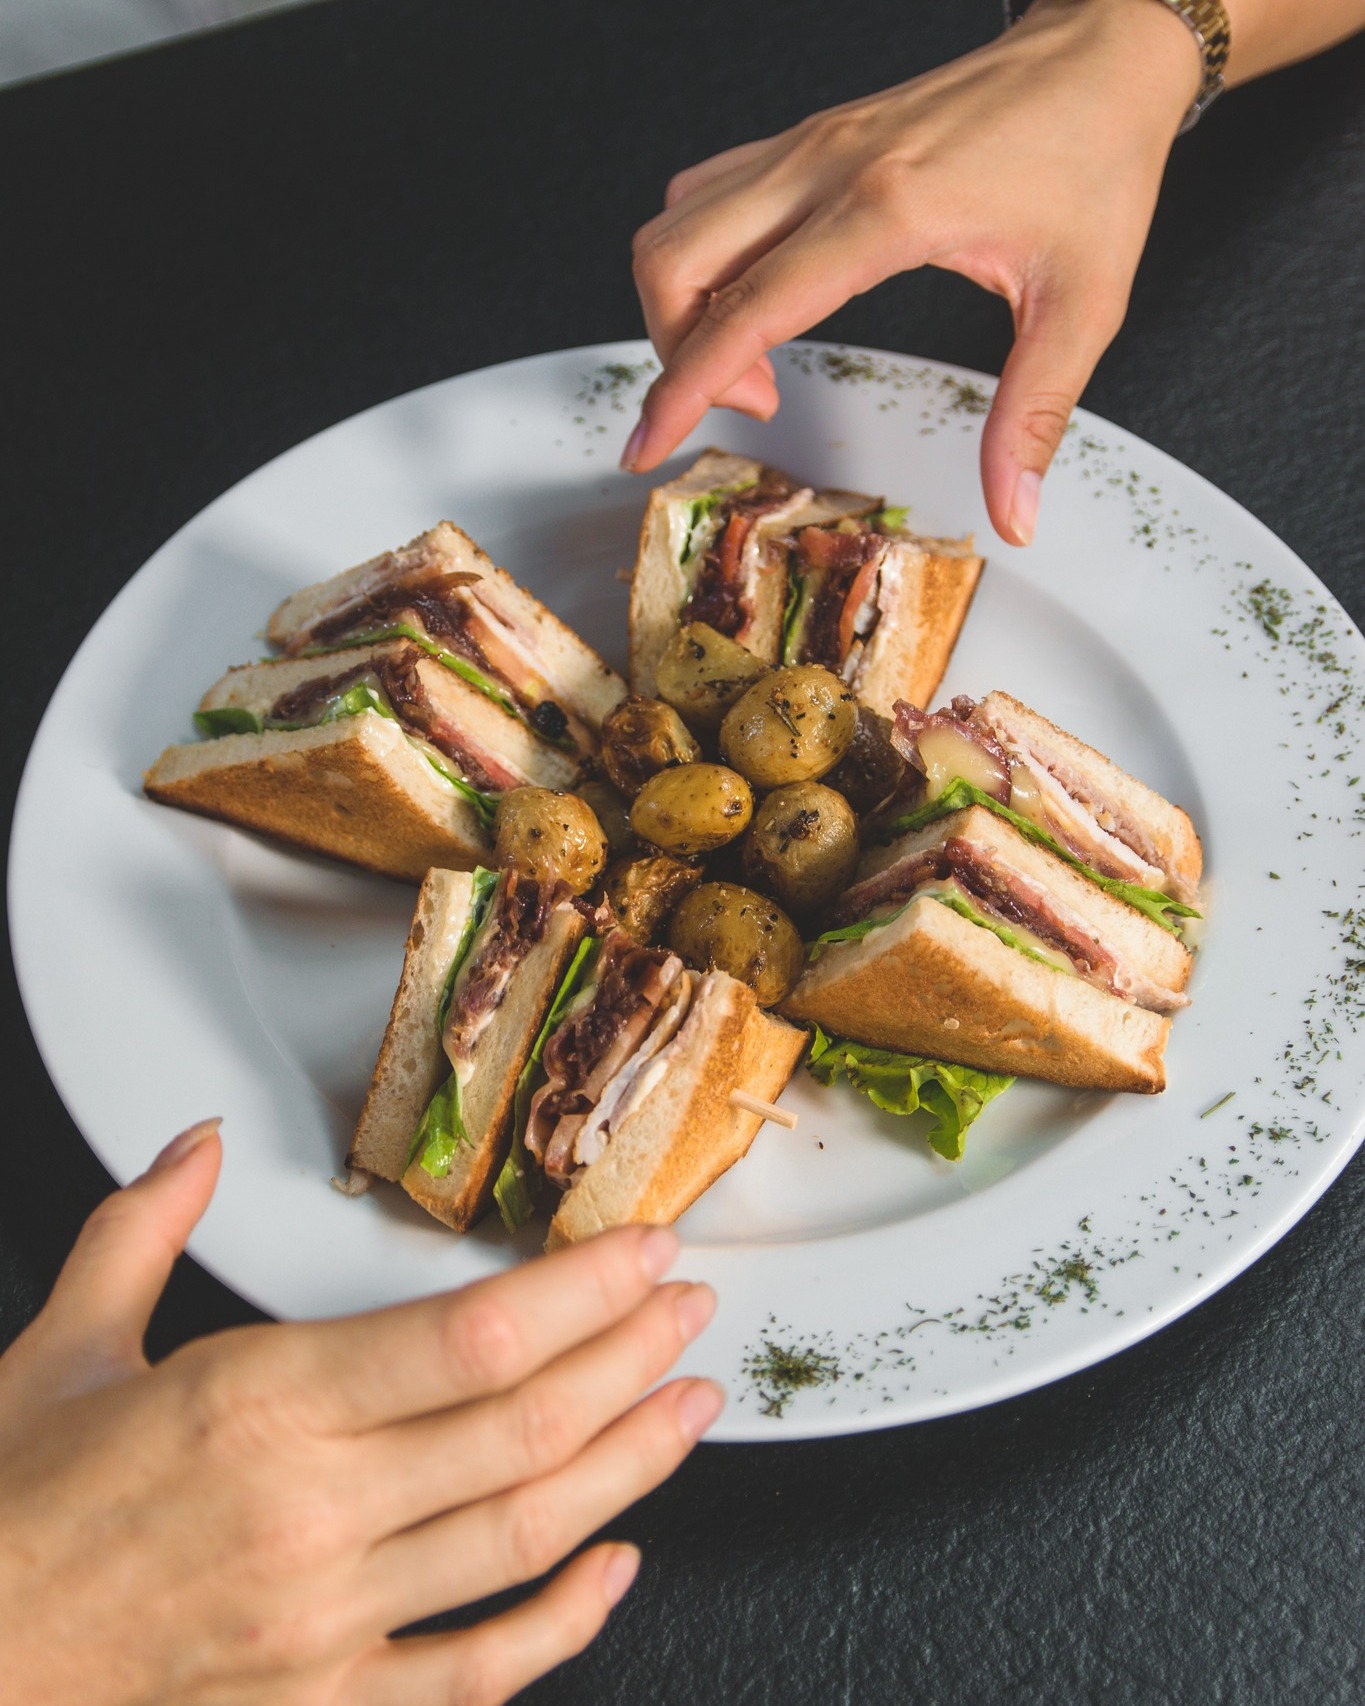 A club sandwich at Belleville, cut into four sections. Two people are each reaching out one hand to pick up a piece off the plate.